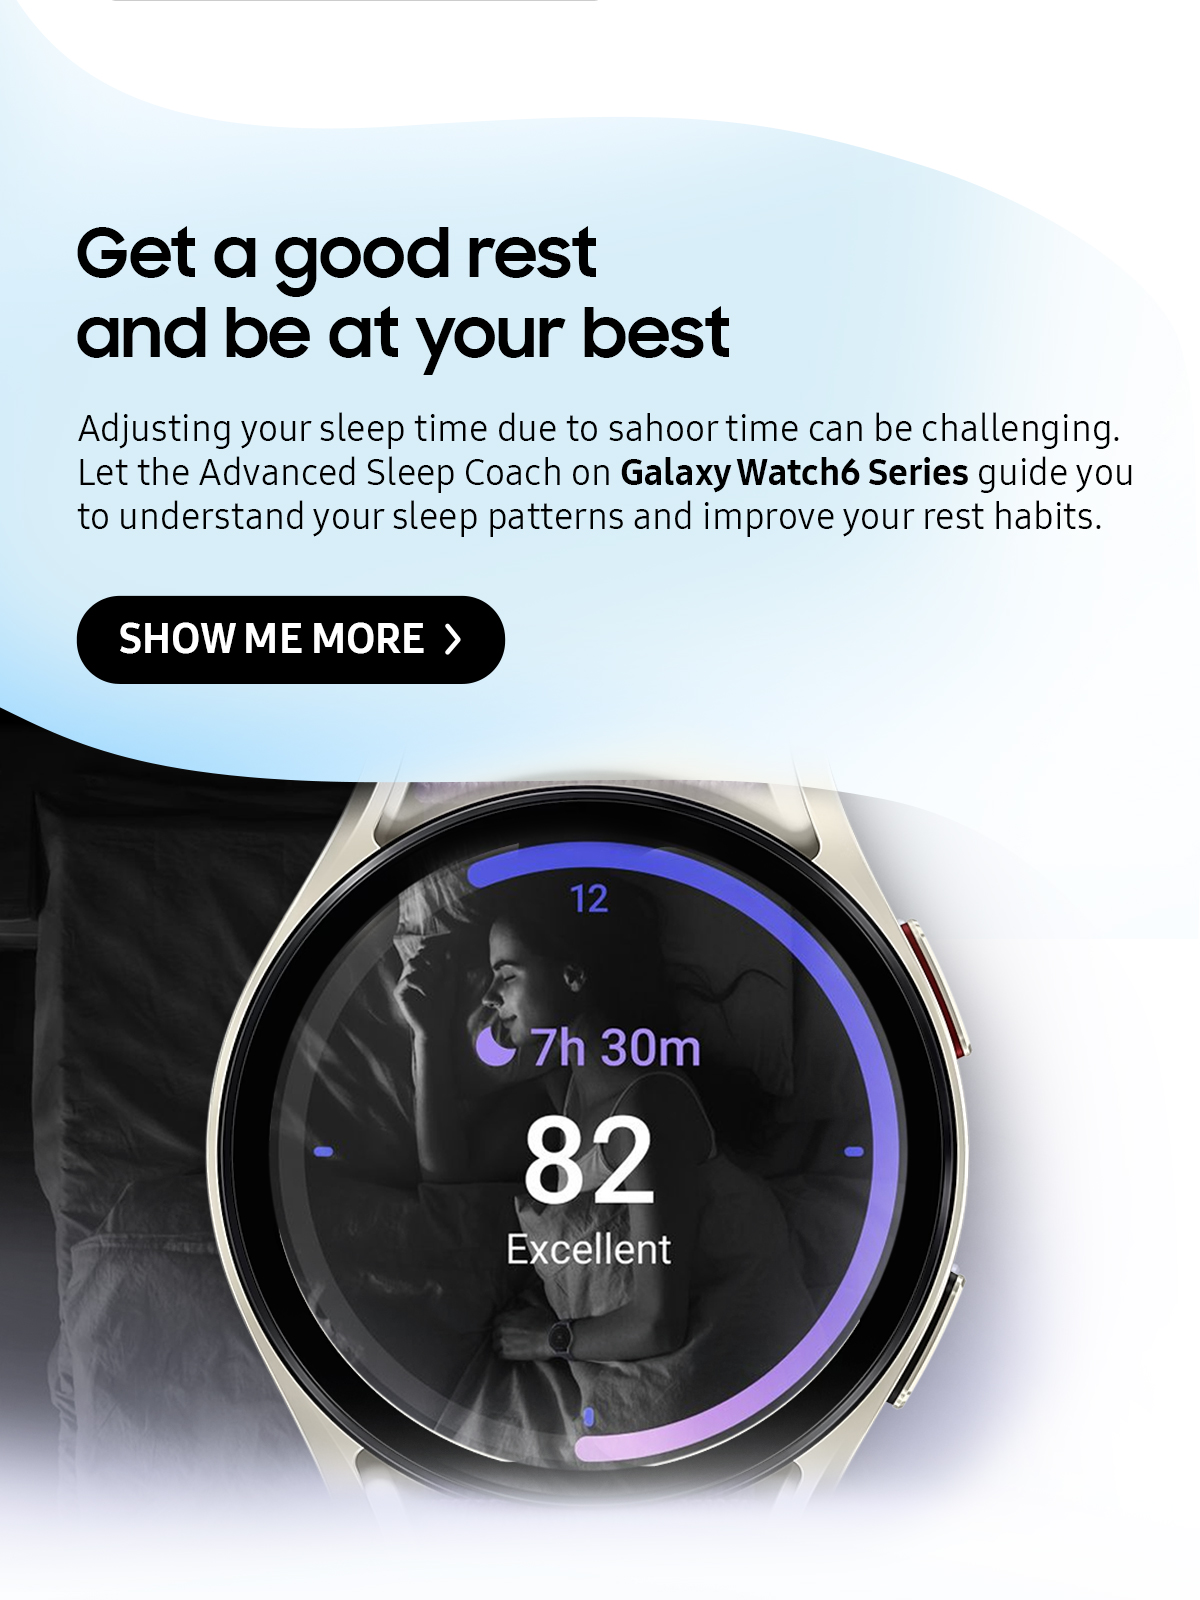 Get a good rest and be at your best | Adjusting your sleep time due to sahoor time can be challenging. Let the Advanced Sleep Coach on Galaxy Watch6 Series guide you to understand your sleep patterns and improve your rest habits.